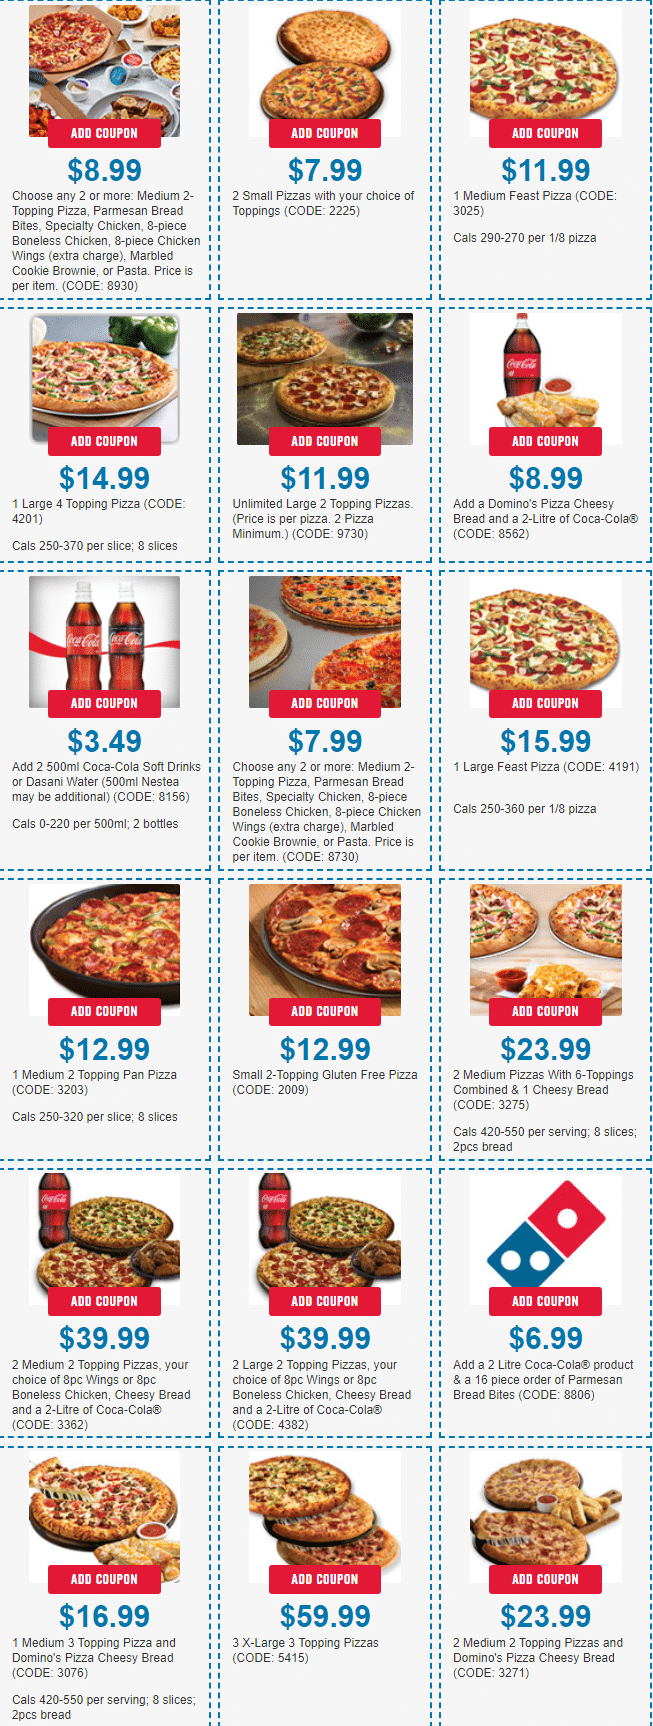 dominos coupons